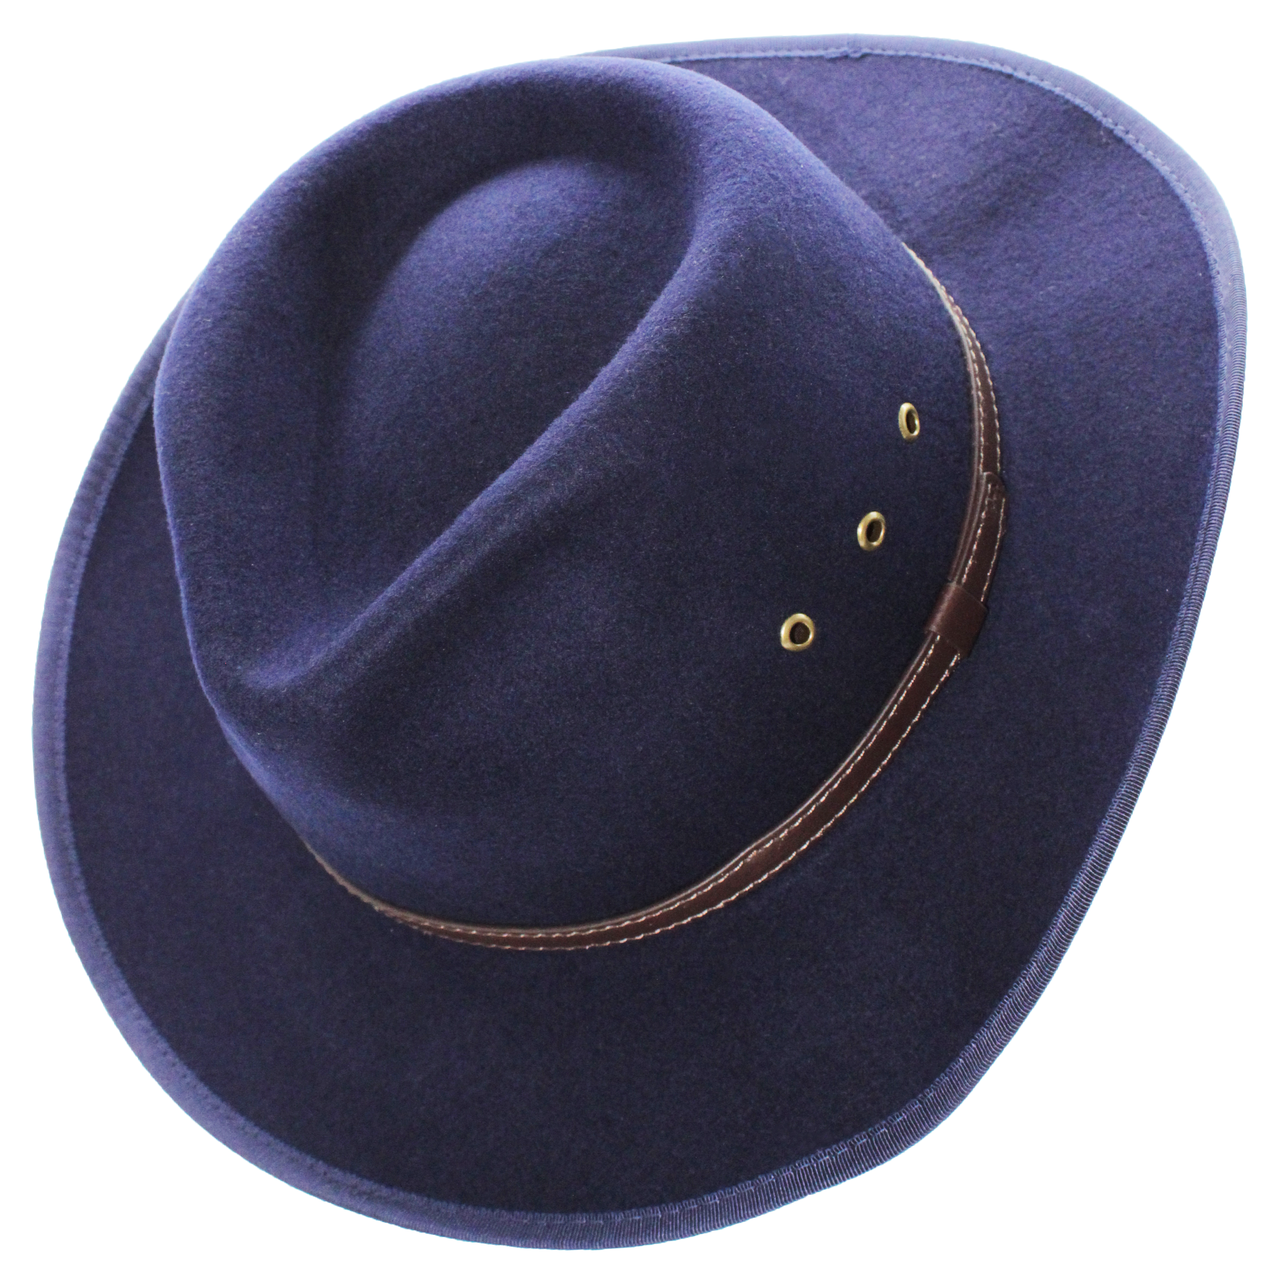 City Hatters Countryman Hat